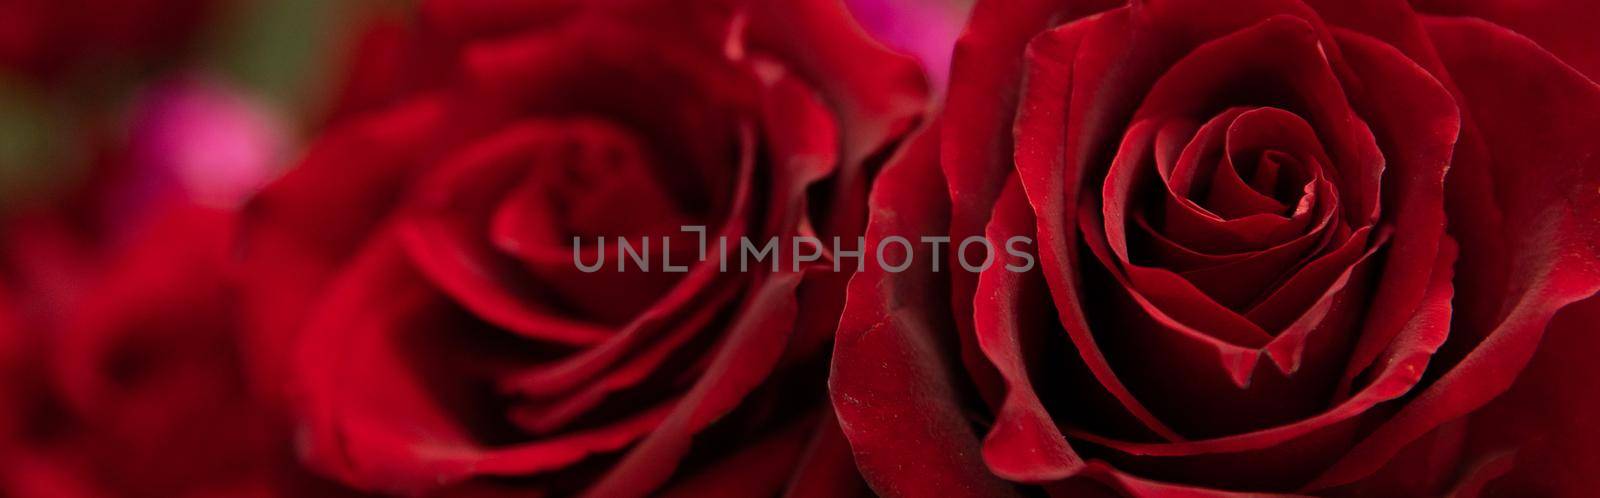 burgundy rose bud close-up photography with depth of field by TRMK